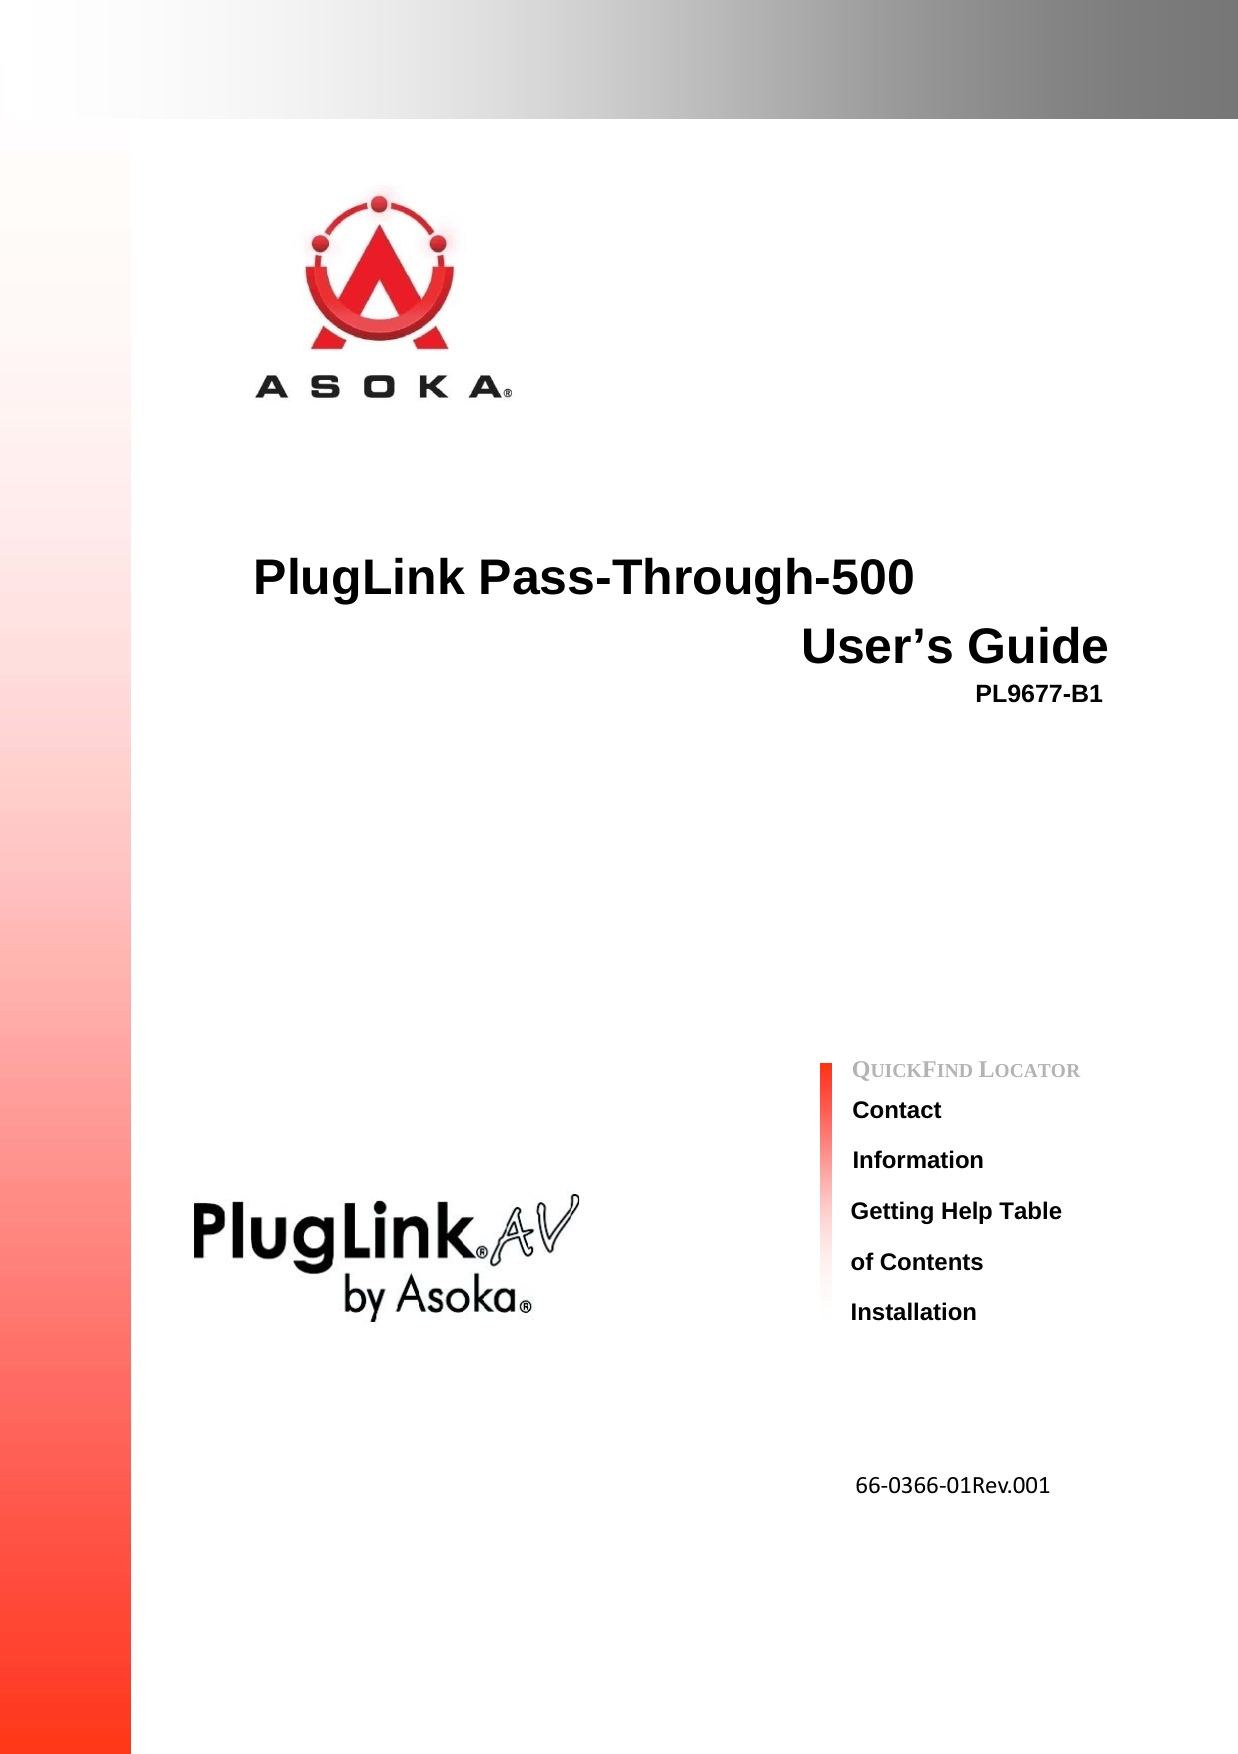          PlugLink Pass-Through-500 User’s Guide PL9677-B1                  QUICKFIND LOCATOR  Contact  Information Getting Help Table of Contents Installation        66‐0366‐01Rev.001